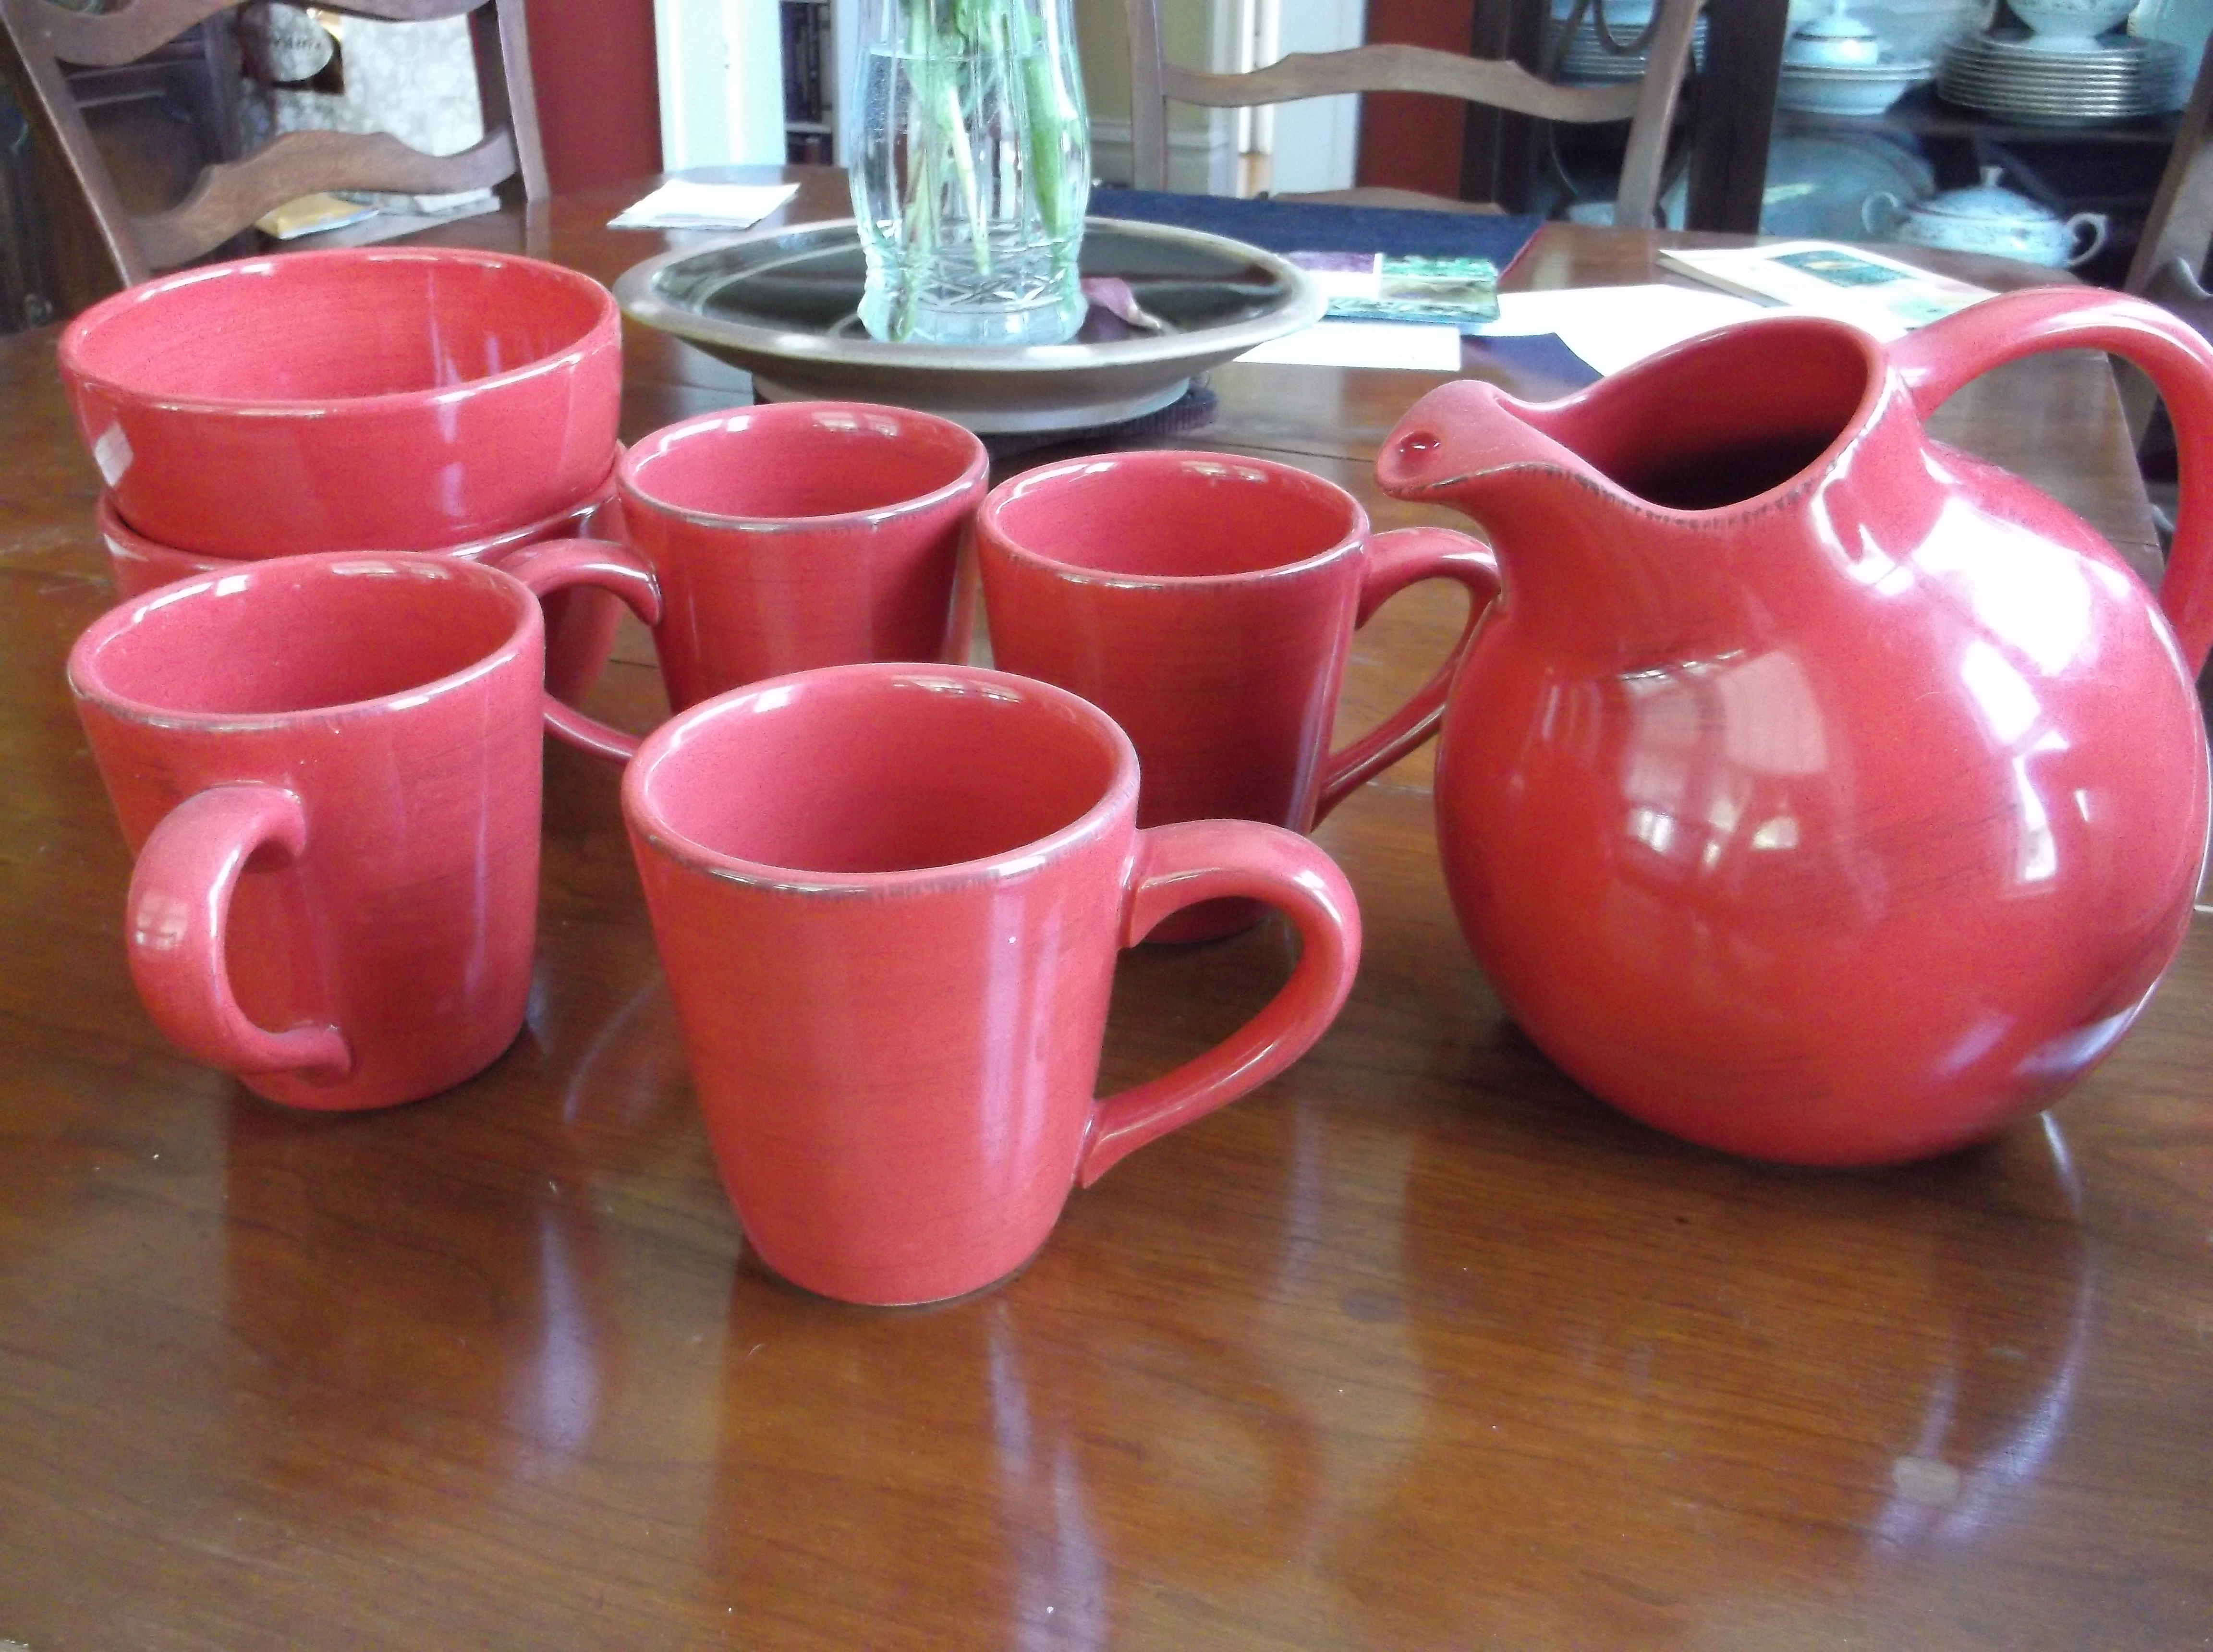 Red mug-and-pitcher set and two red bowls that happen to match them - for sale.